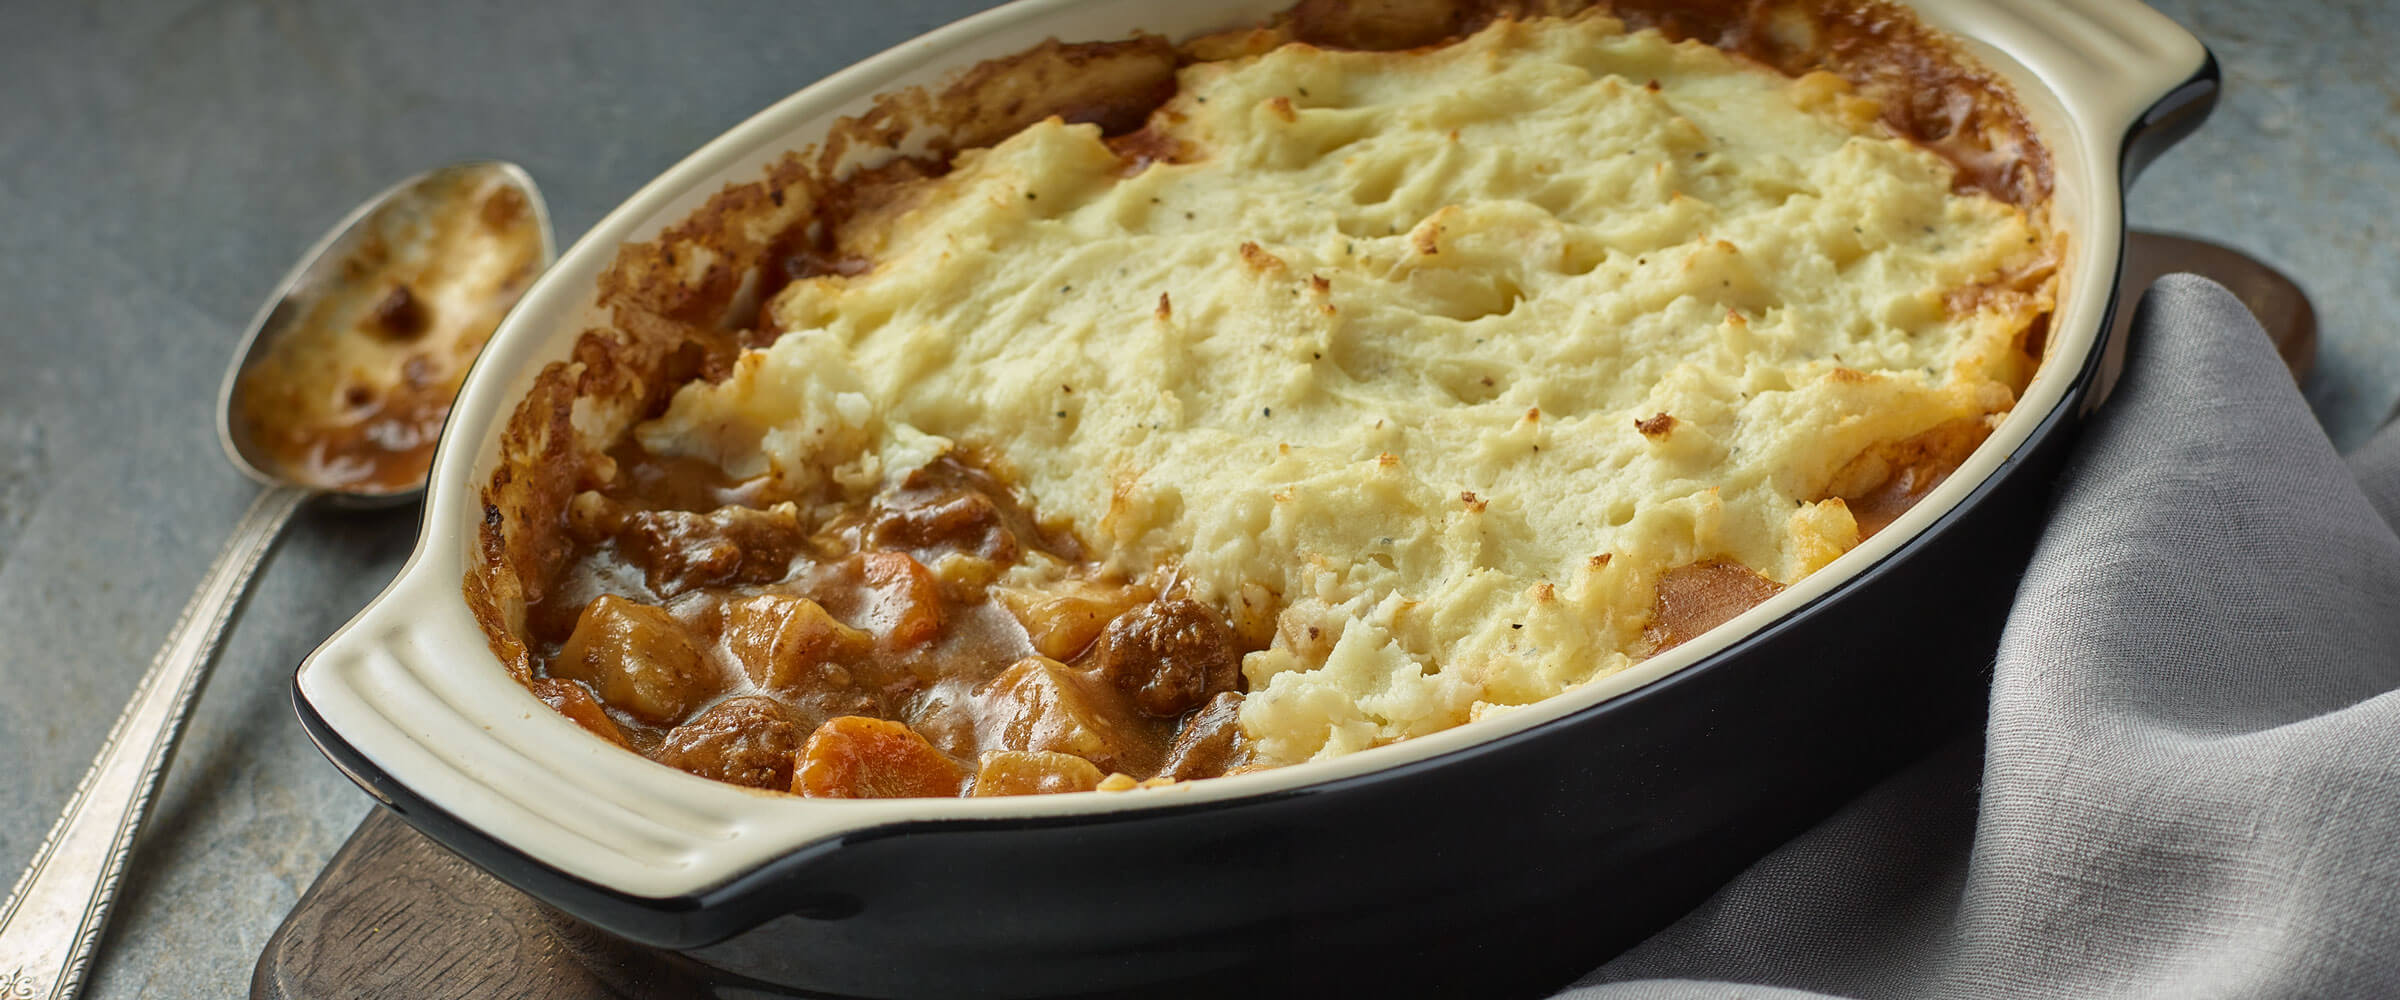 https://www.hormel.com/brands/dinty-moore-beef-stew/wp-content/uploads/sites/5/Recipes_2400_Dinty_Moore_Easy_Sheperds_Pie.jpg